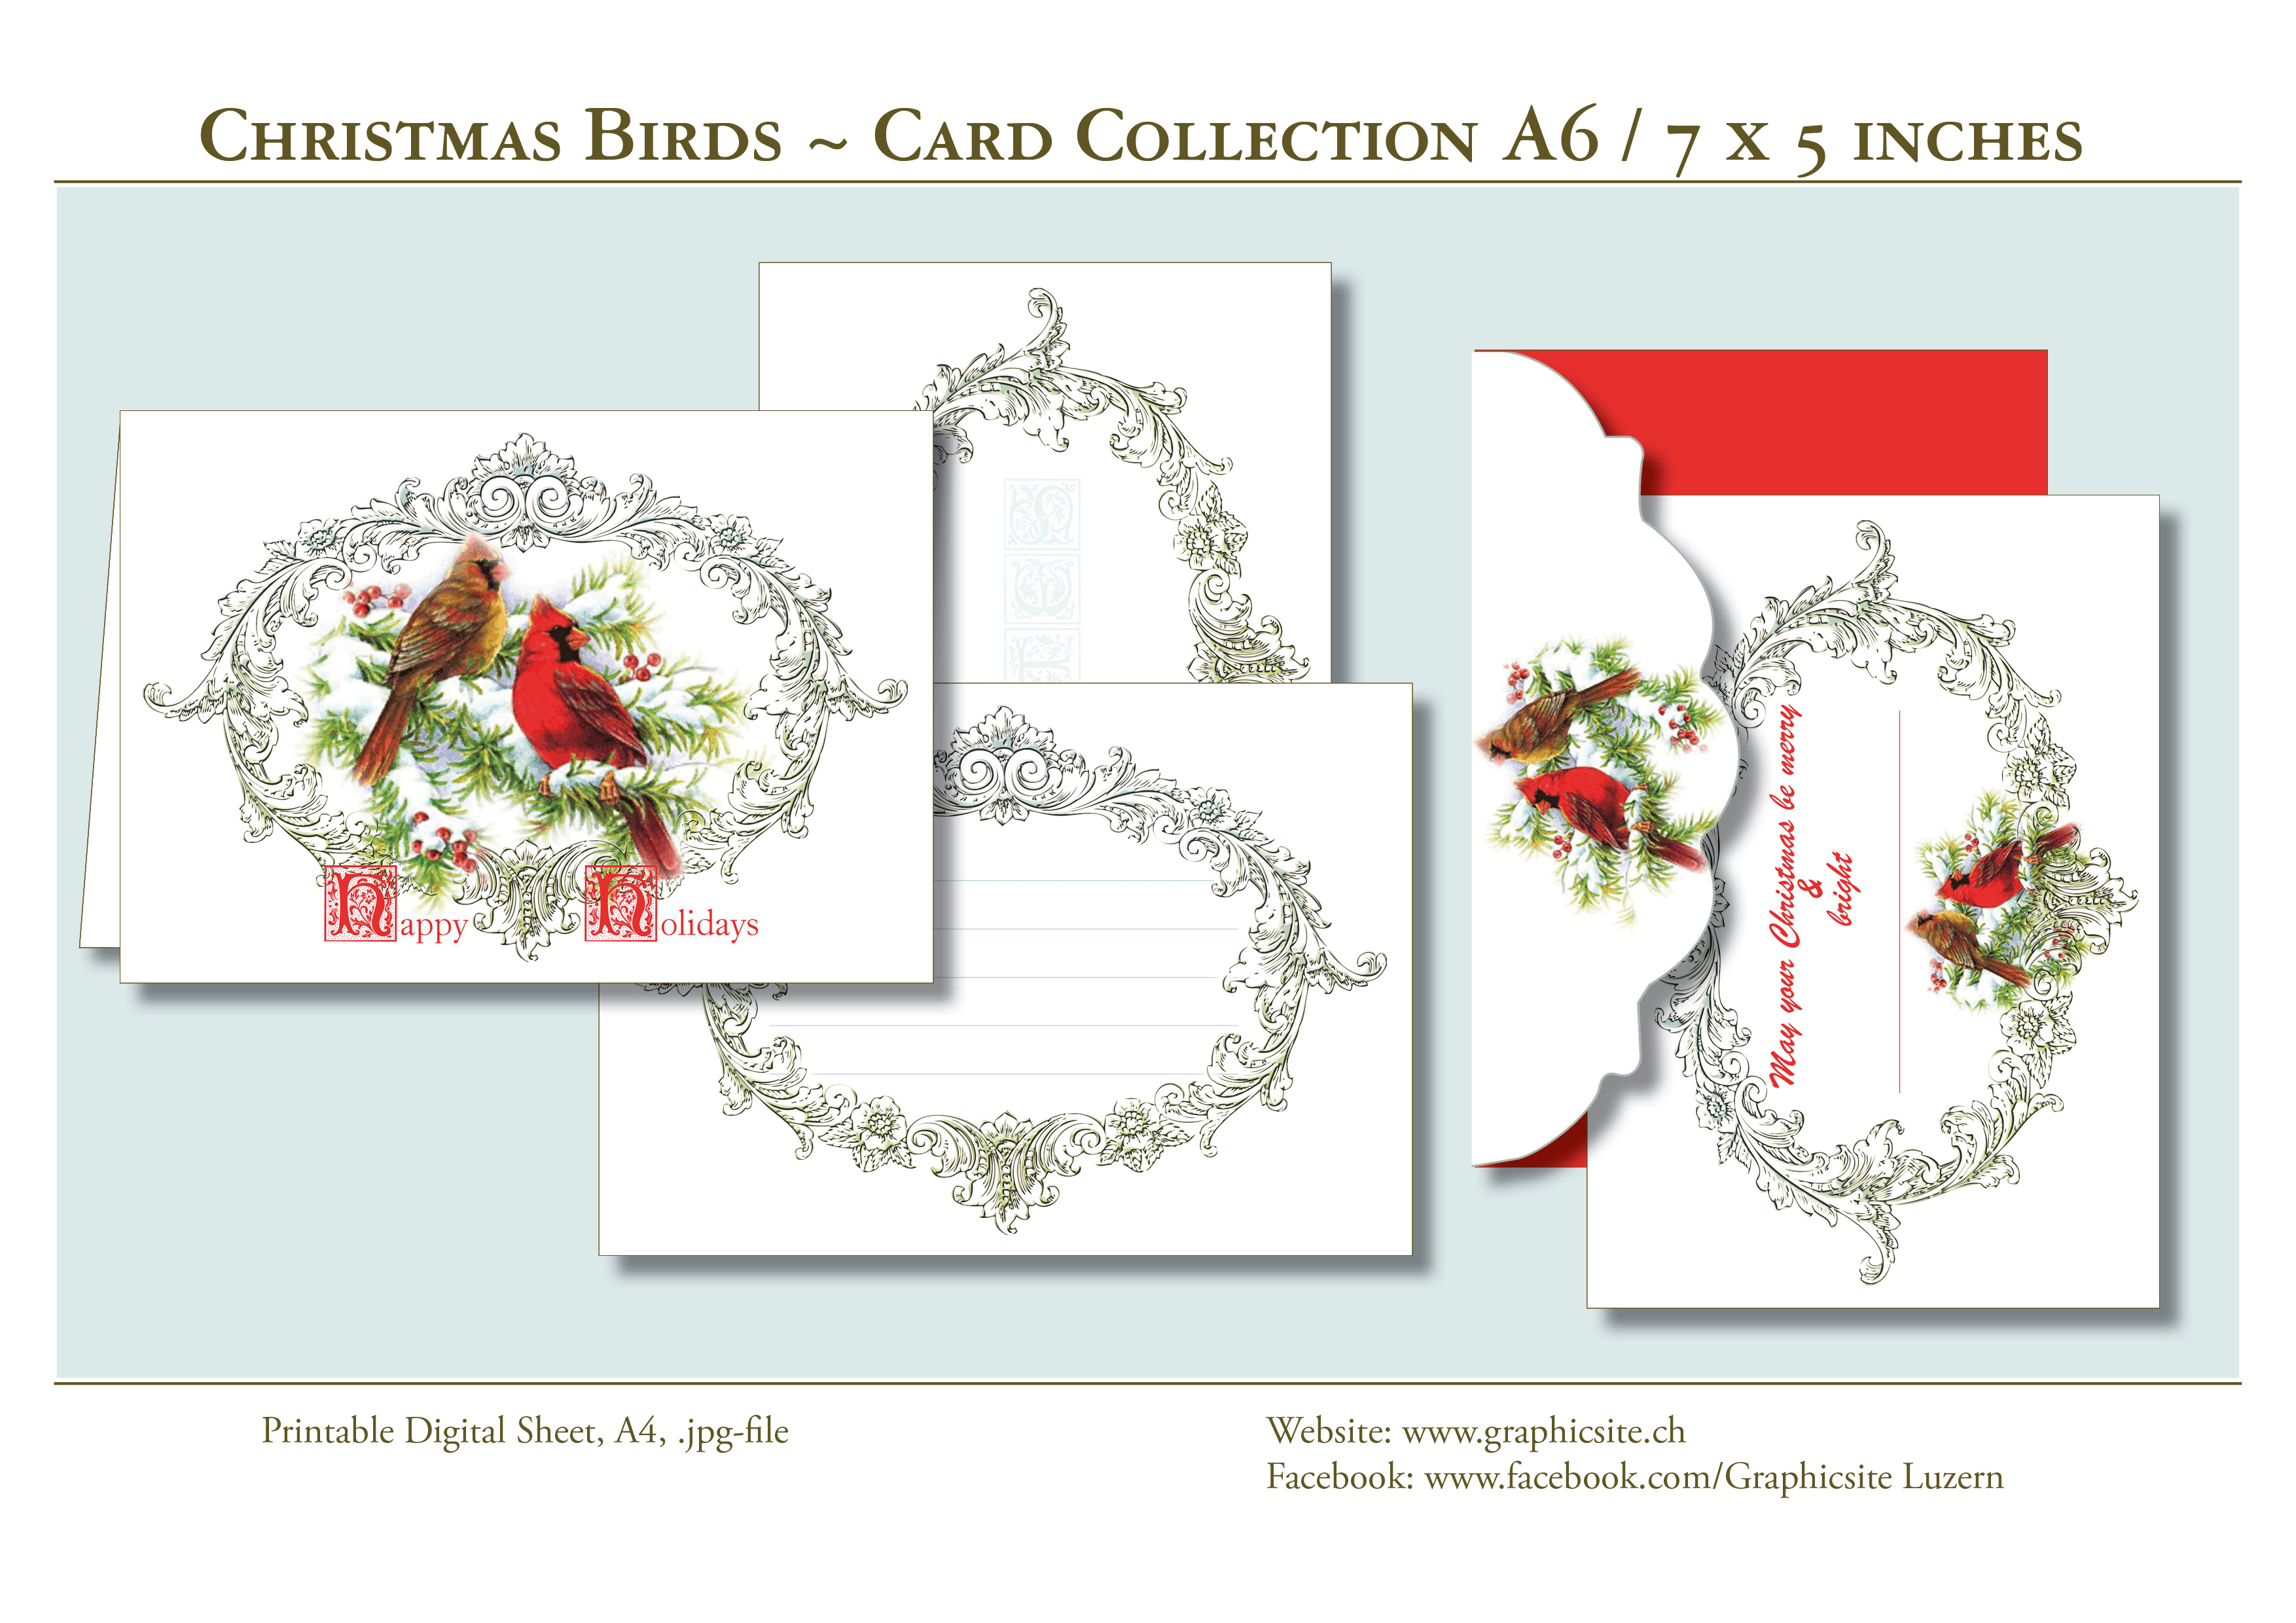 Printable Digital Sheets - Card Collection A6 - Christmas - Birds, Holidays, season, greeting cards, notecards, envelope, graphic design, luzern,